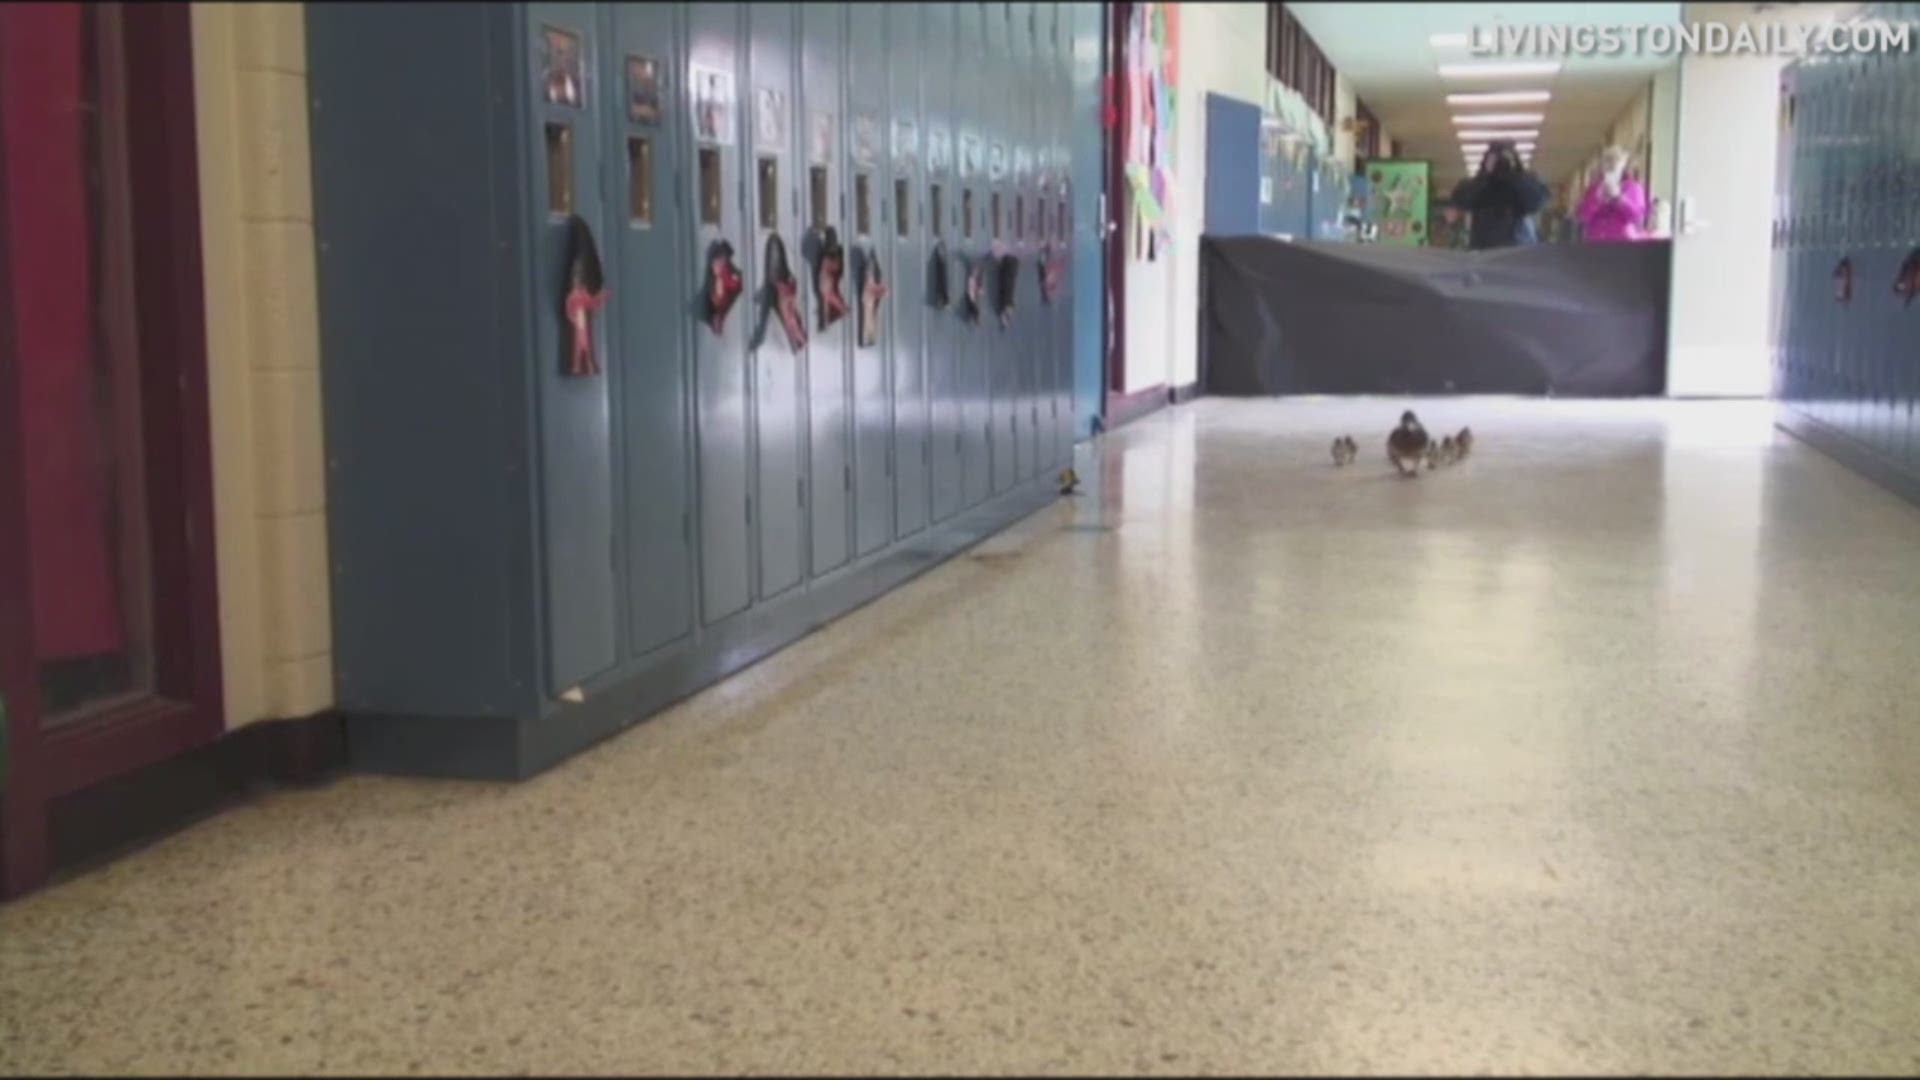 A mama duck laid her eggs in the courtyard of a Michigan elementary school. Since her ducklings can't fly just yet, the school made a safe path for them to the outside world, through the building.